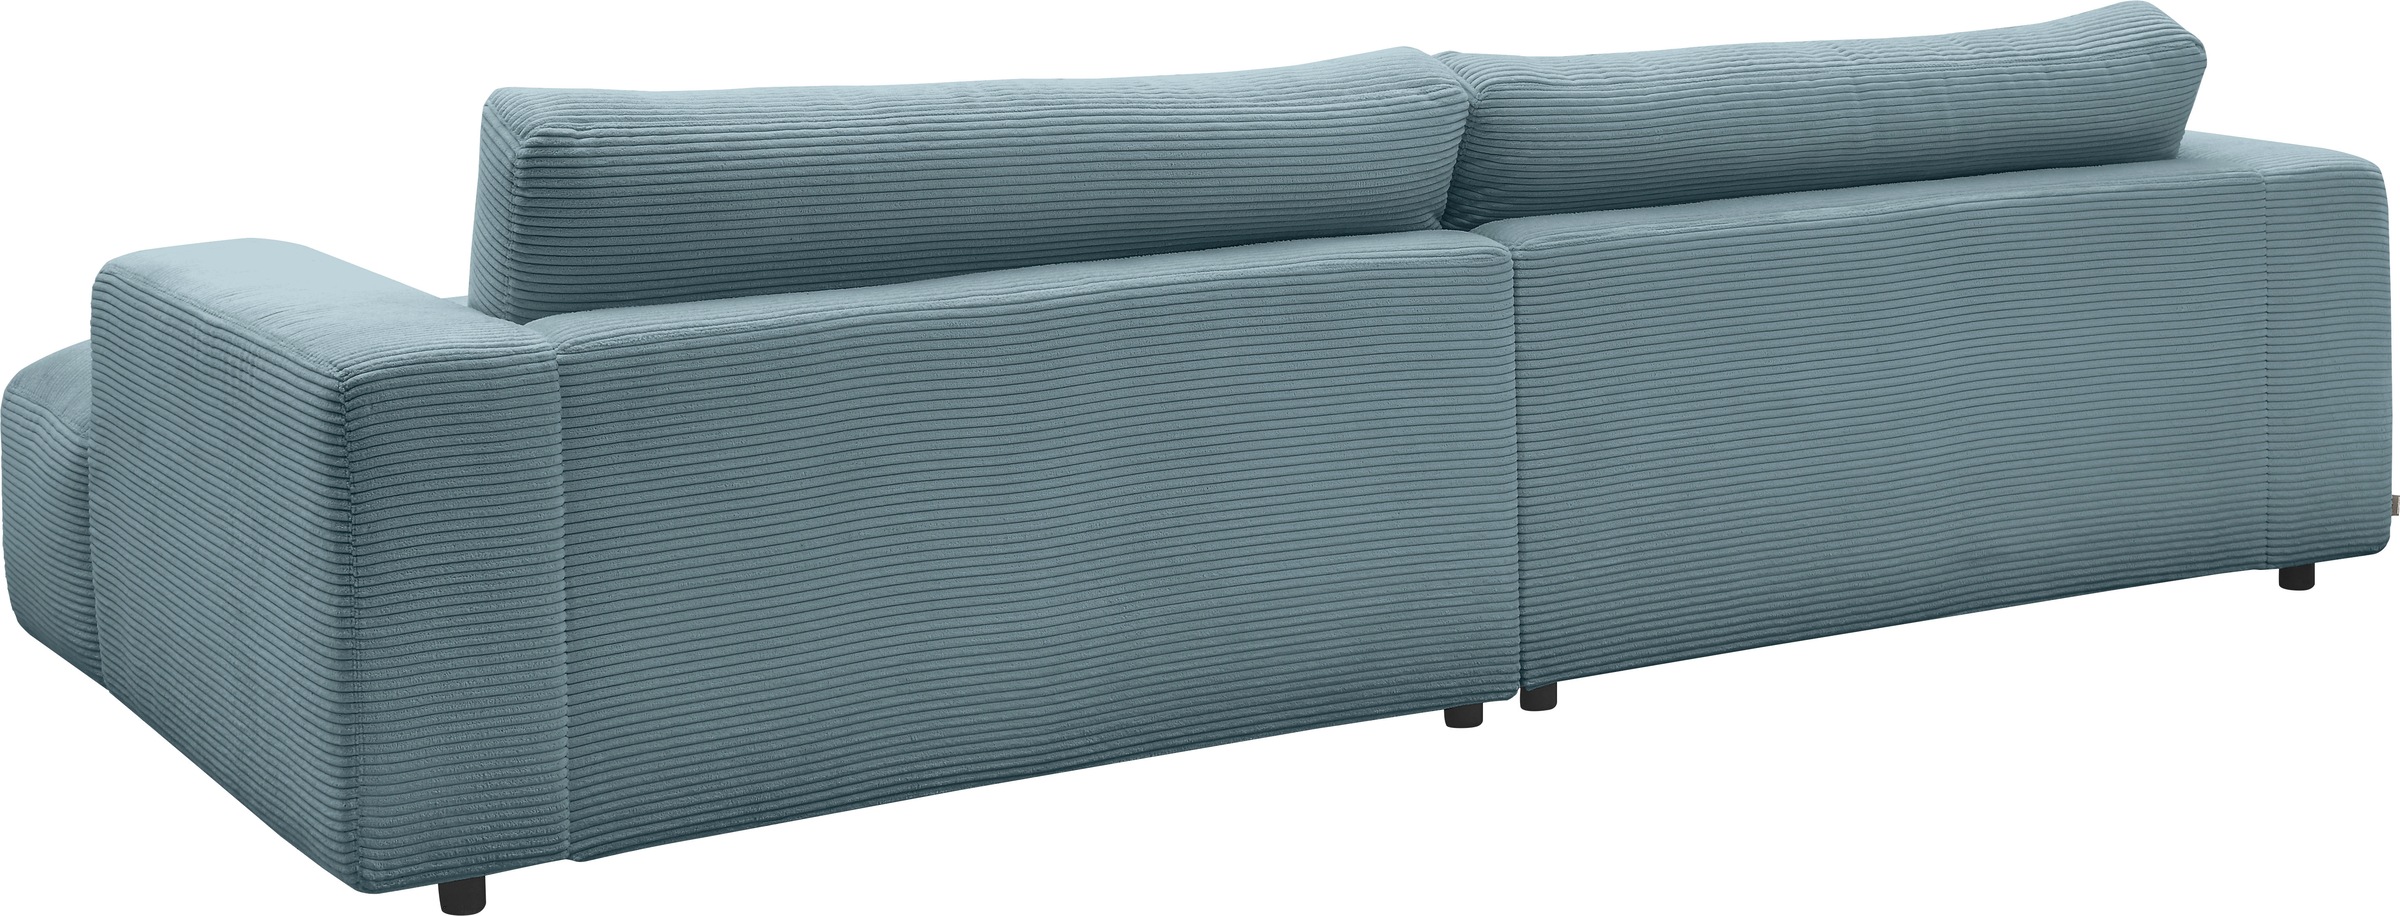 GALLERY M branded by Musterring kaufen »Lucia«, cm bequem Cord-Bezug, 292 Loungesofa Breite